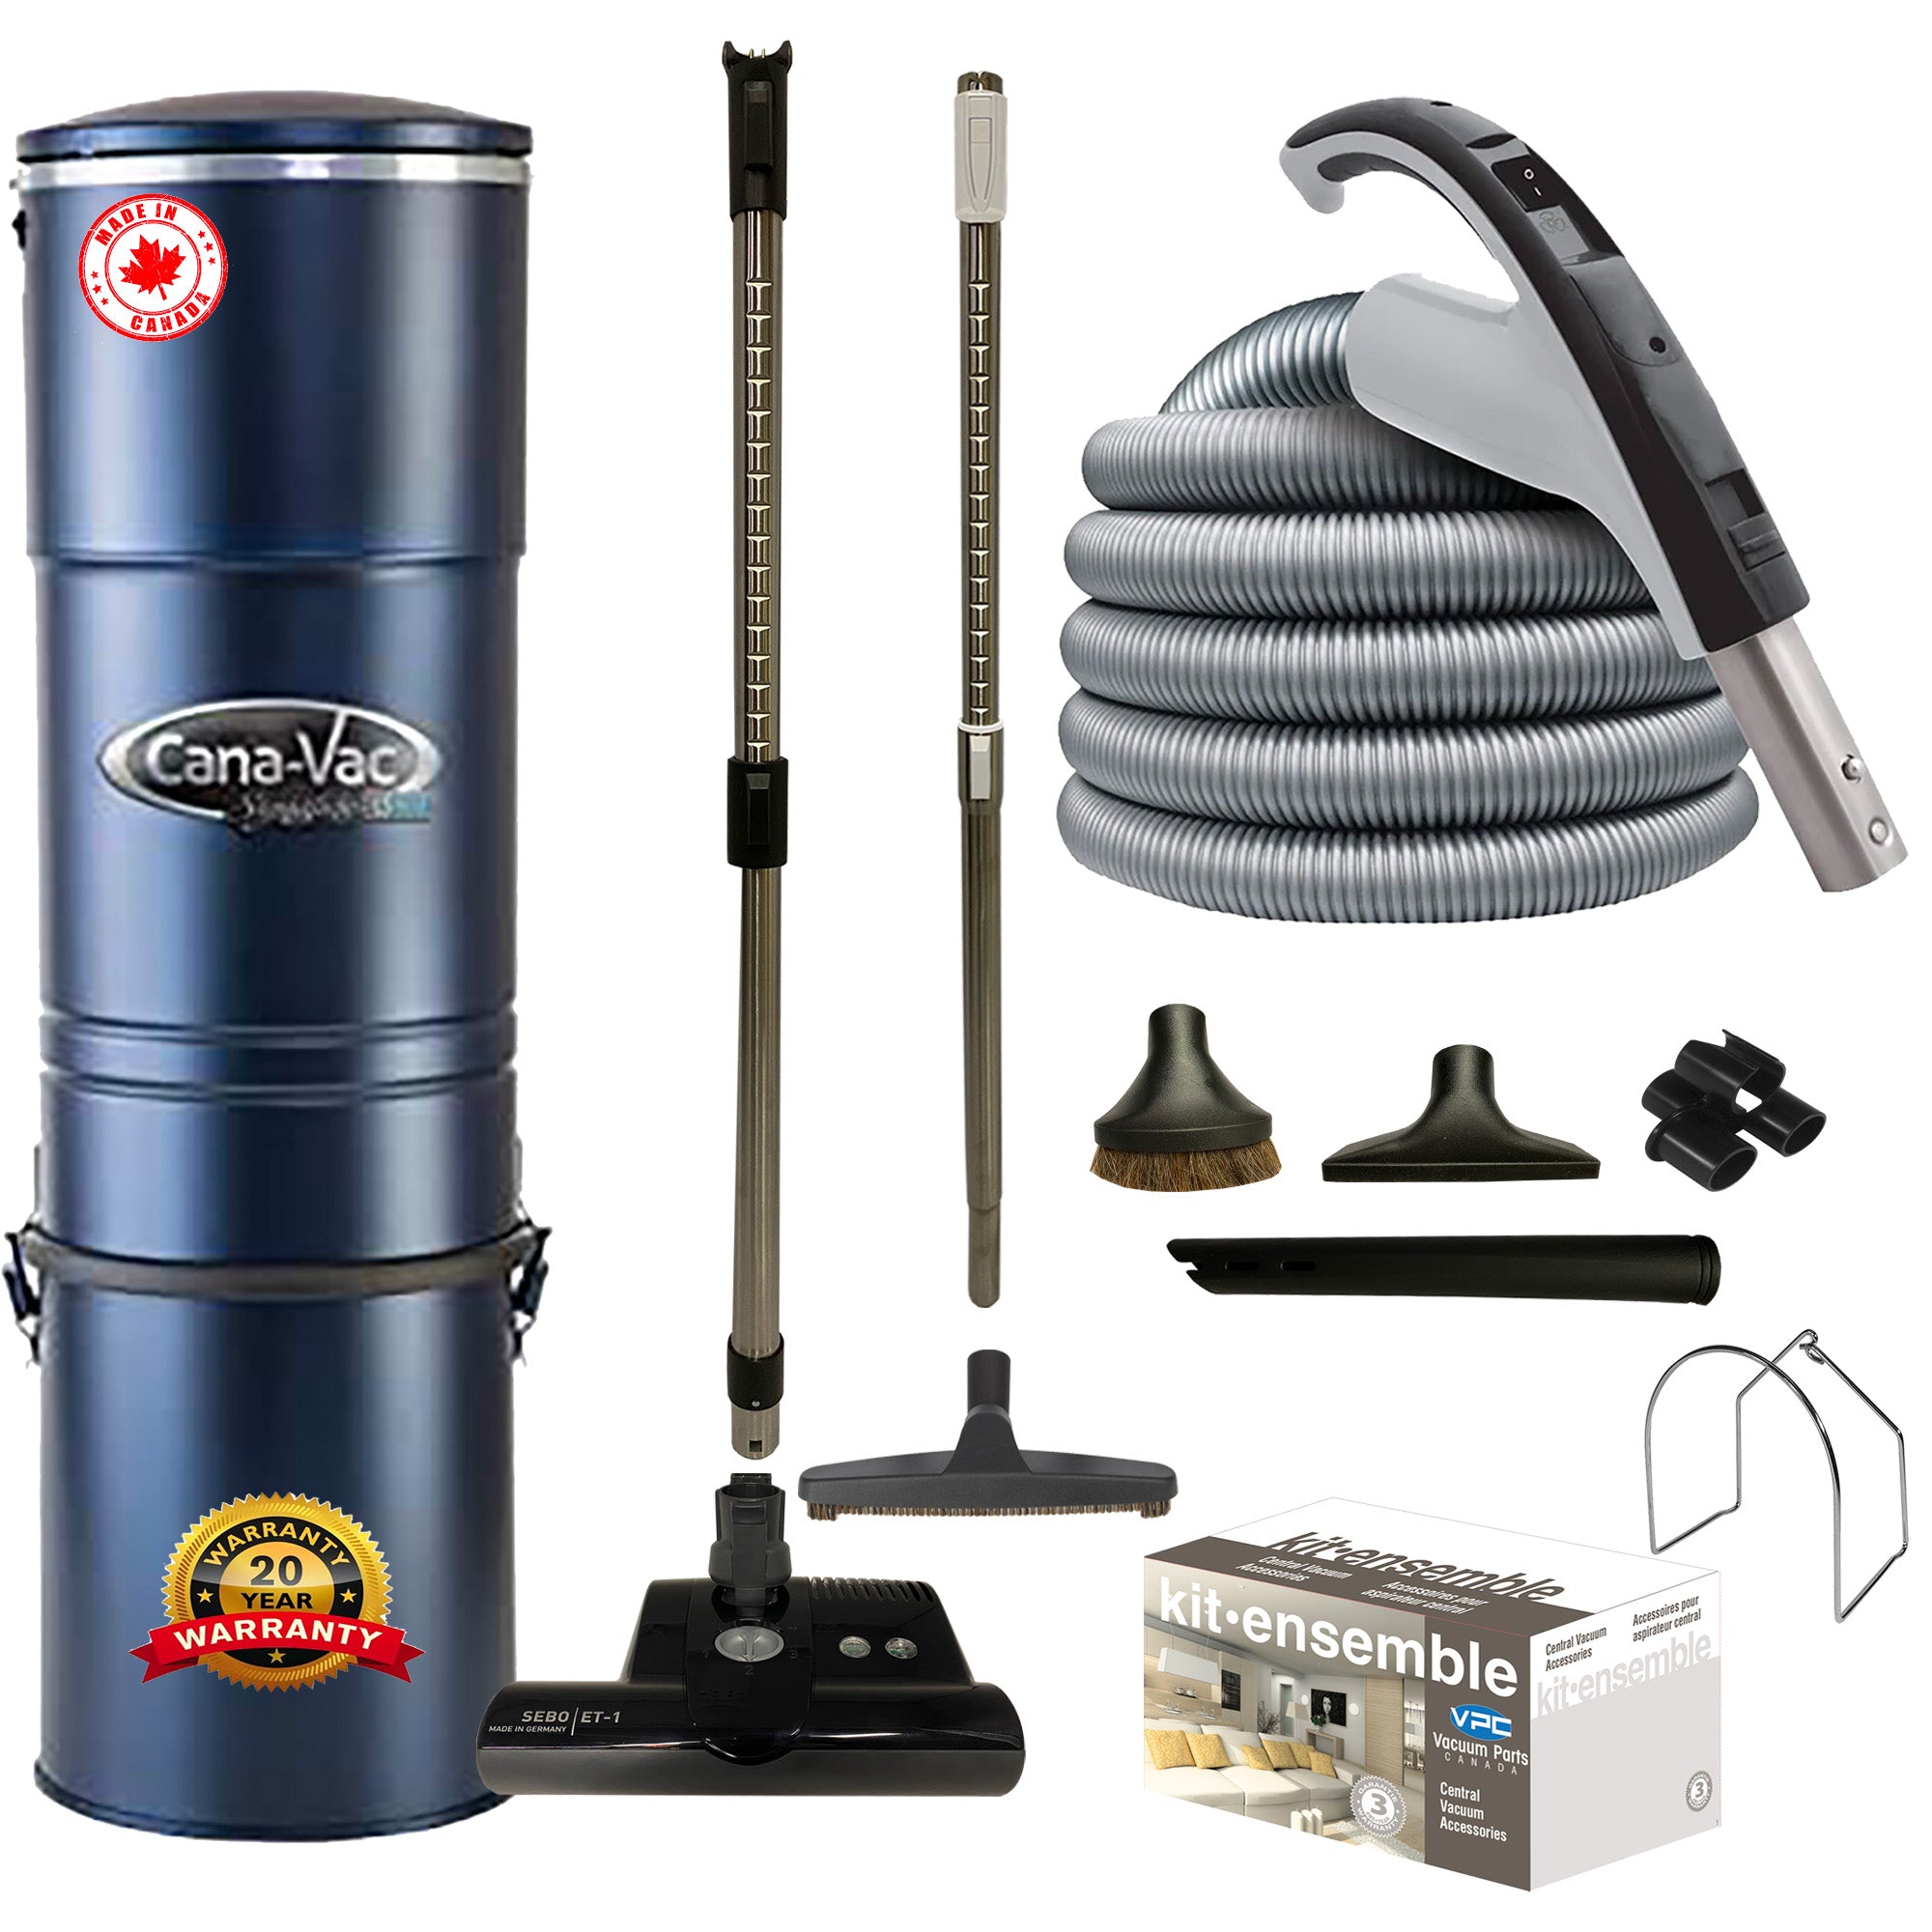 Cana-Vac LS690 Central Vacuum with Premium Electric Package